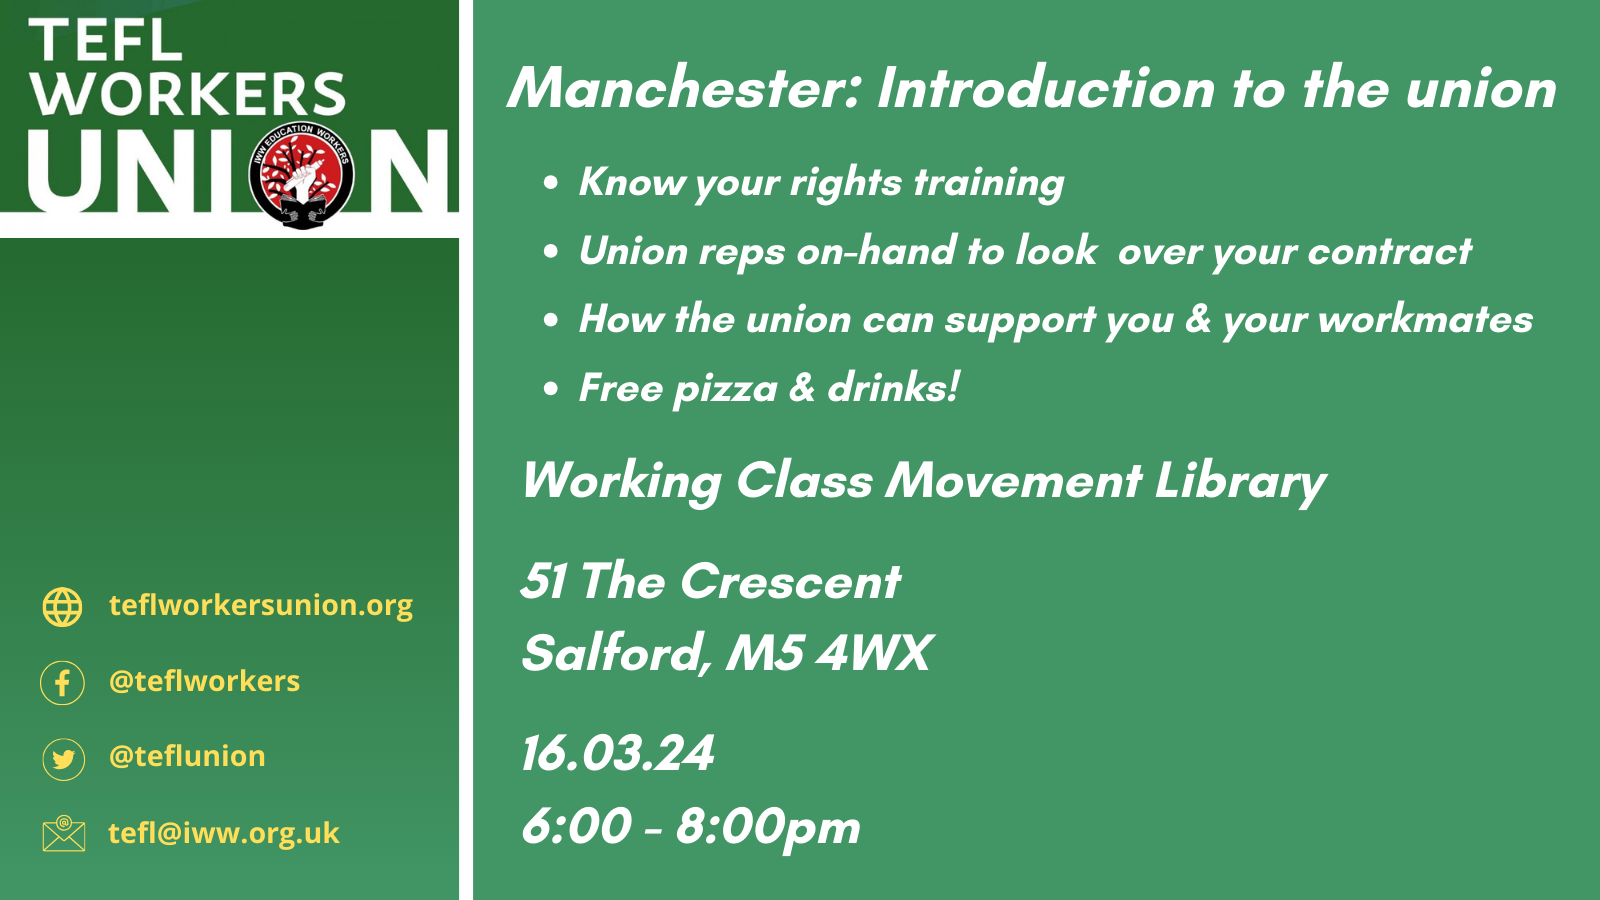 Image shows the details of the event, including place and time: Working Class Movement Library 51 The Crescent Salford, M5 4WX 16.03.24 6:00 - 8:00pm